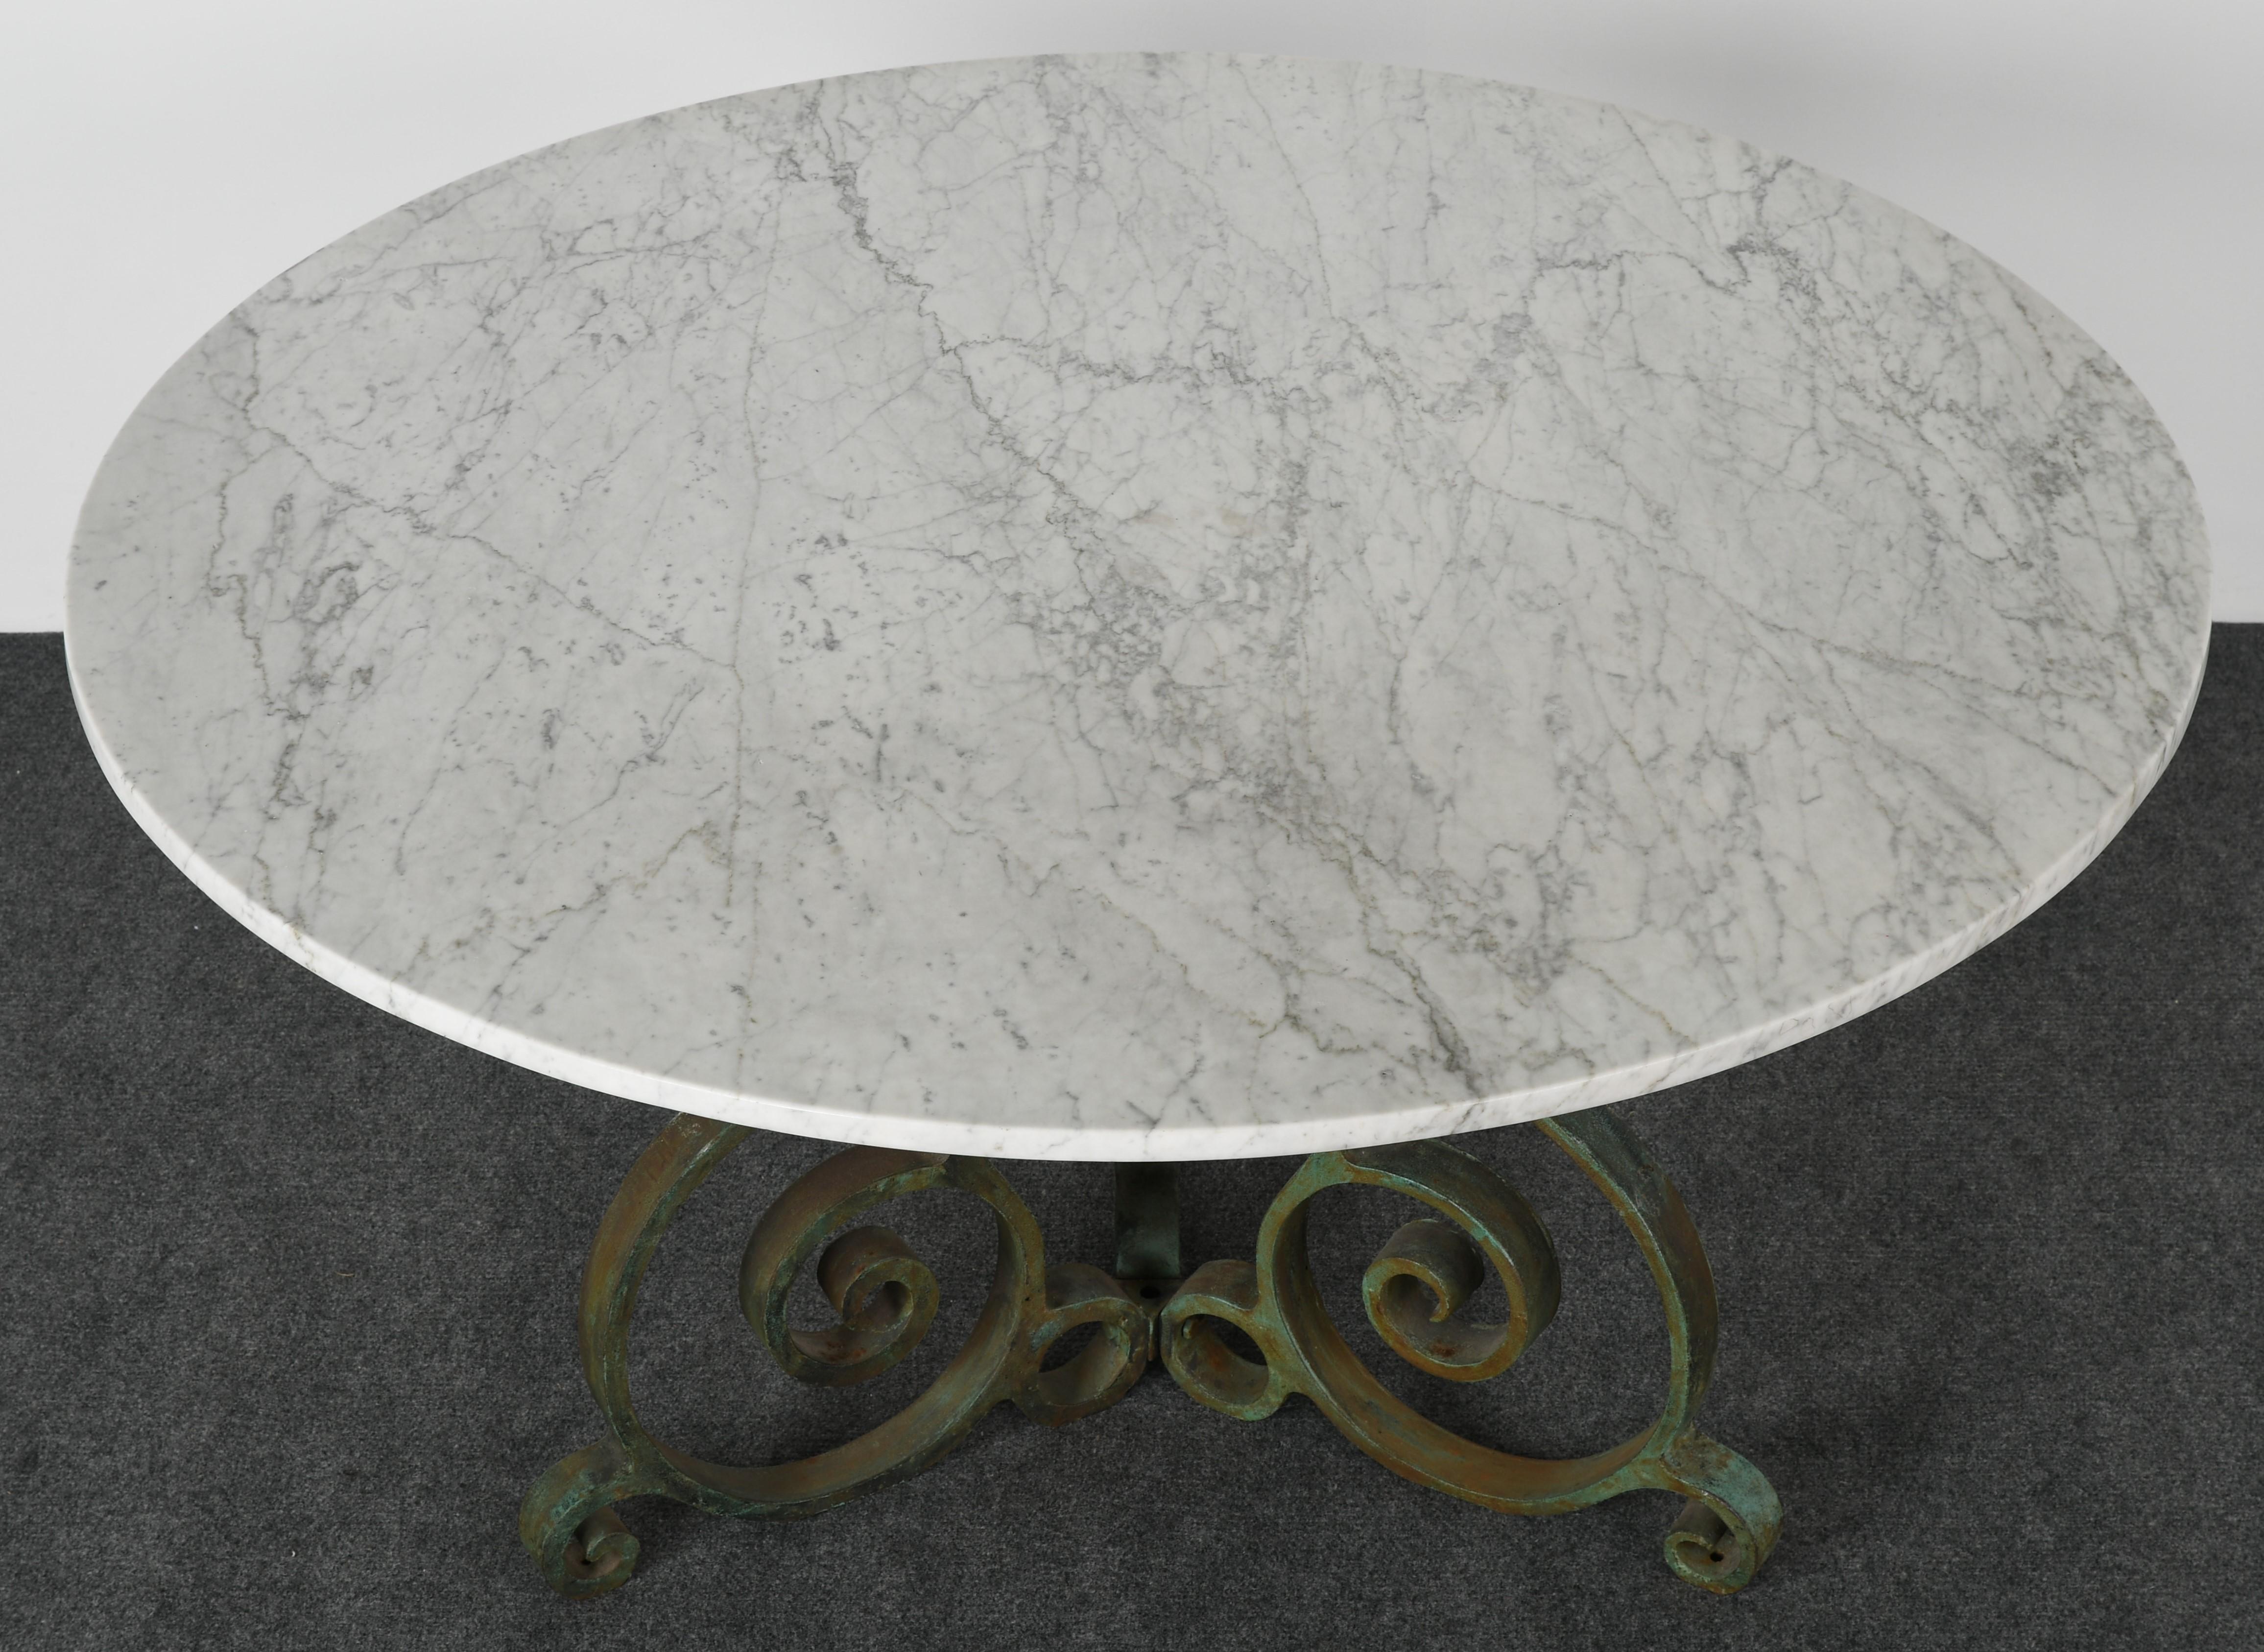 A beautiful Carrara marble and cast iron garden table, the 1950s. Cast iron base has very nice paint and some rust showing through with great patina. Marble has small divets, as shown in images, but not distracting.

Dimensions: 54